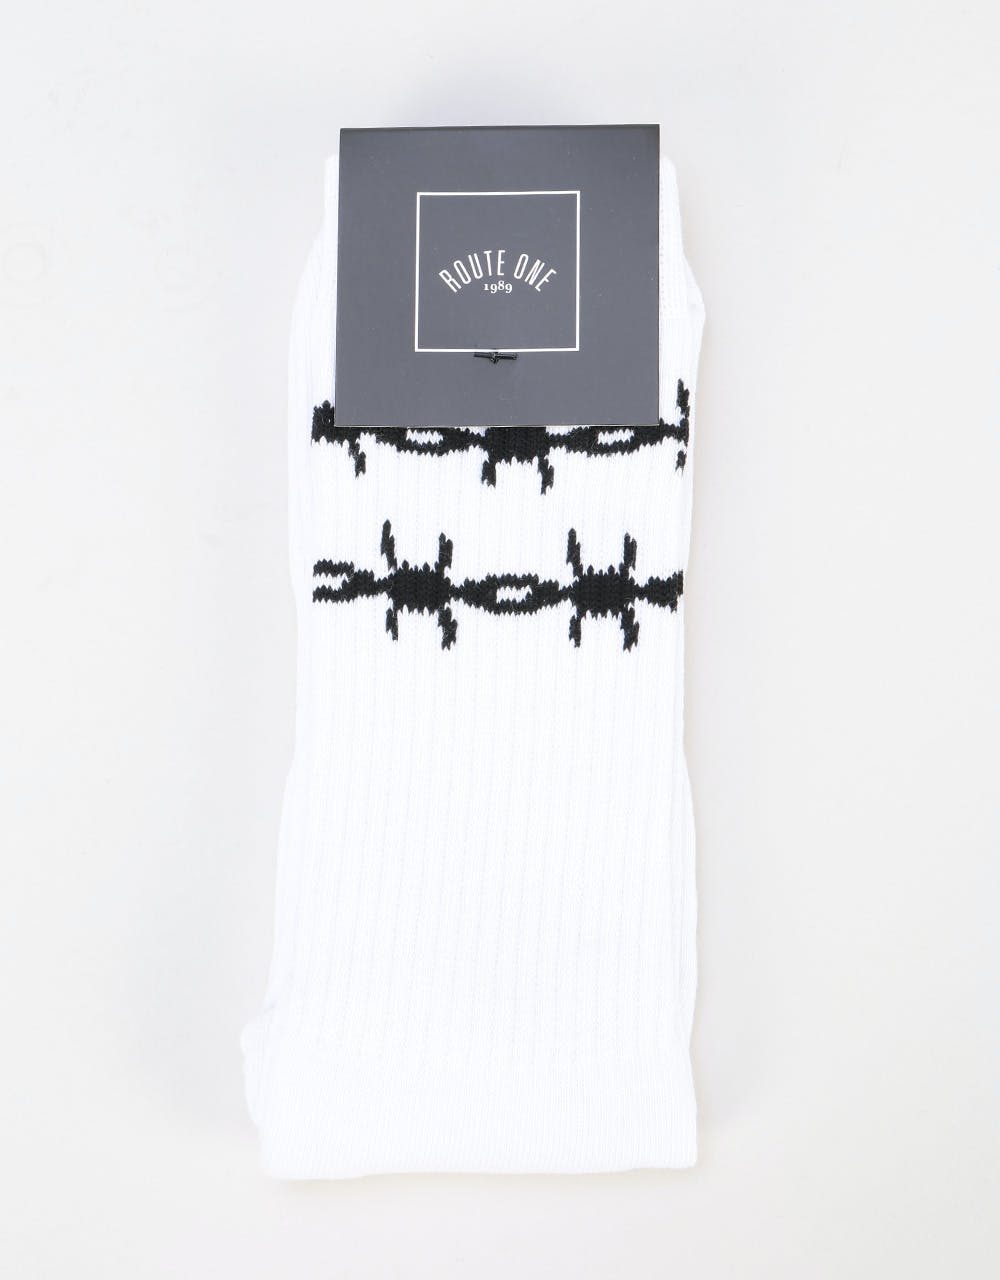 Route One Barbed Wire Socks - White